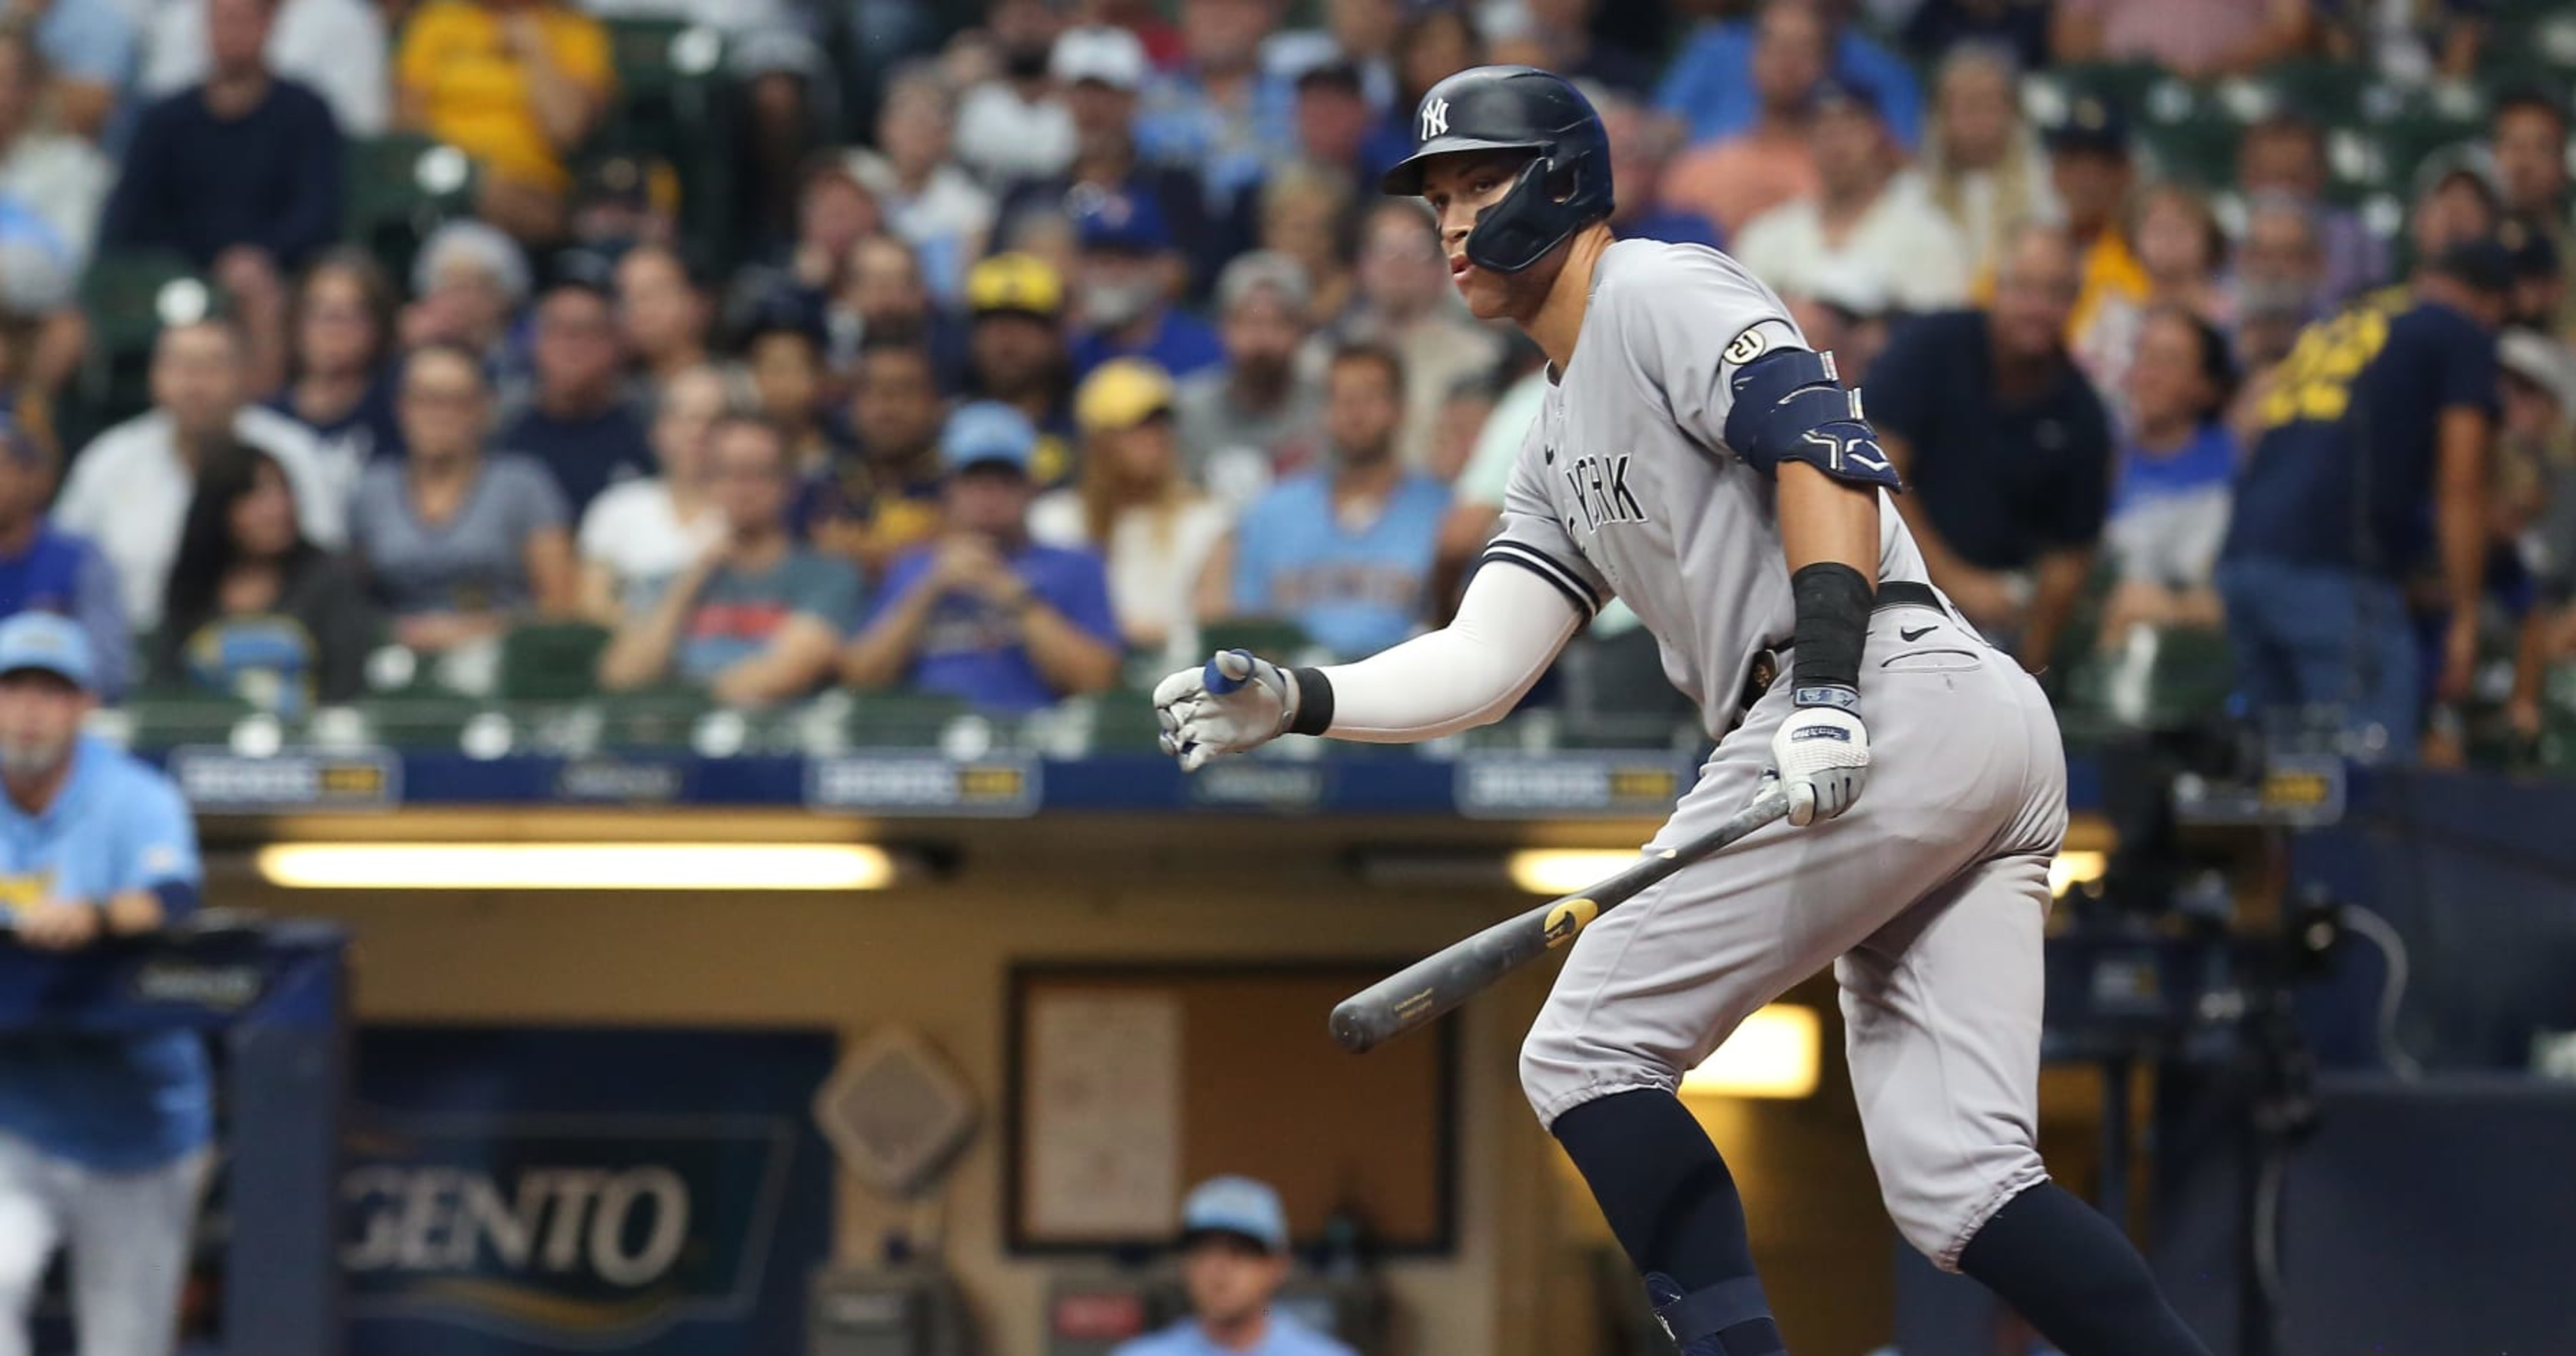 Yankees' Aaron Judge Says He's Not Focused on Stats as He Chases HR